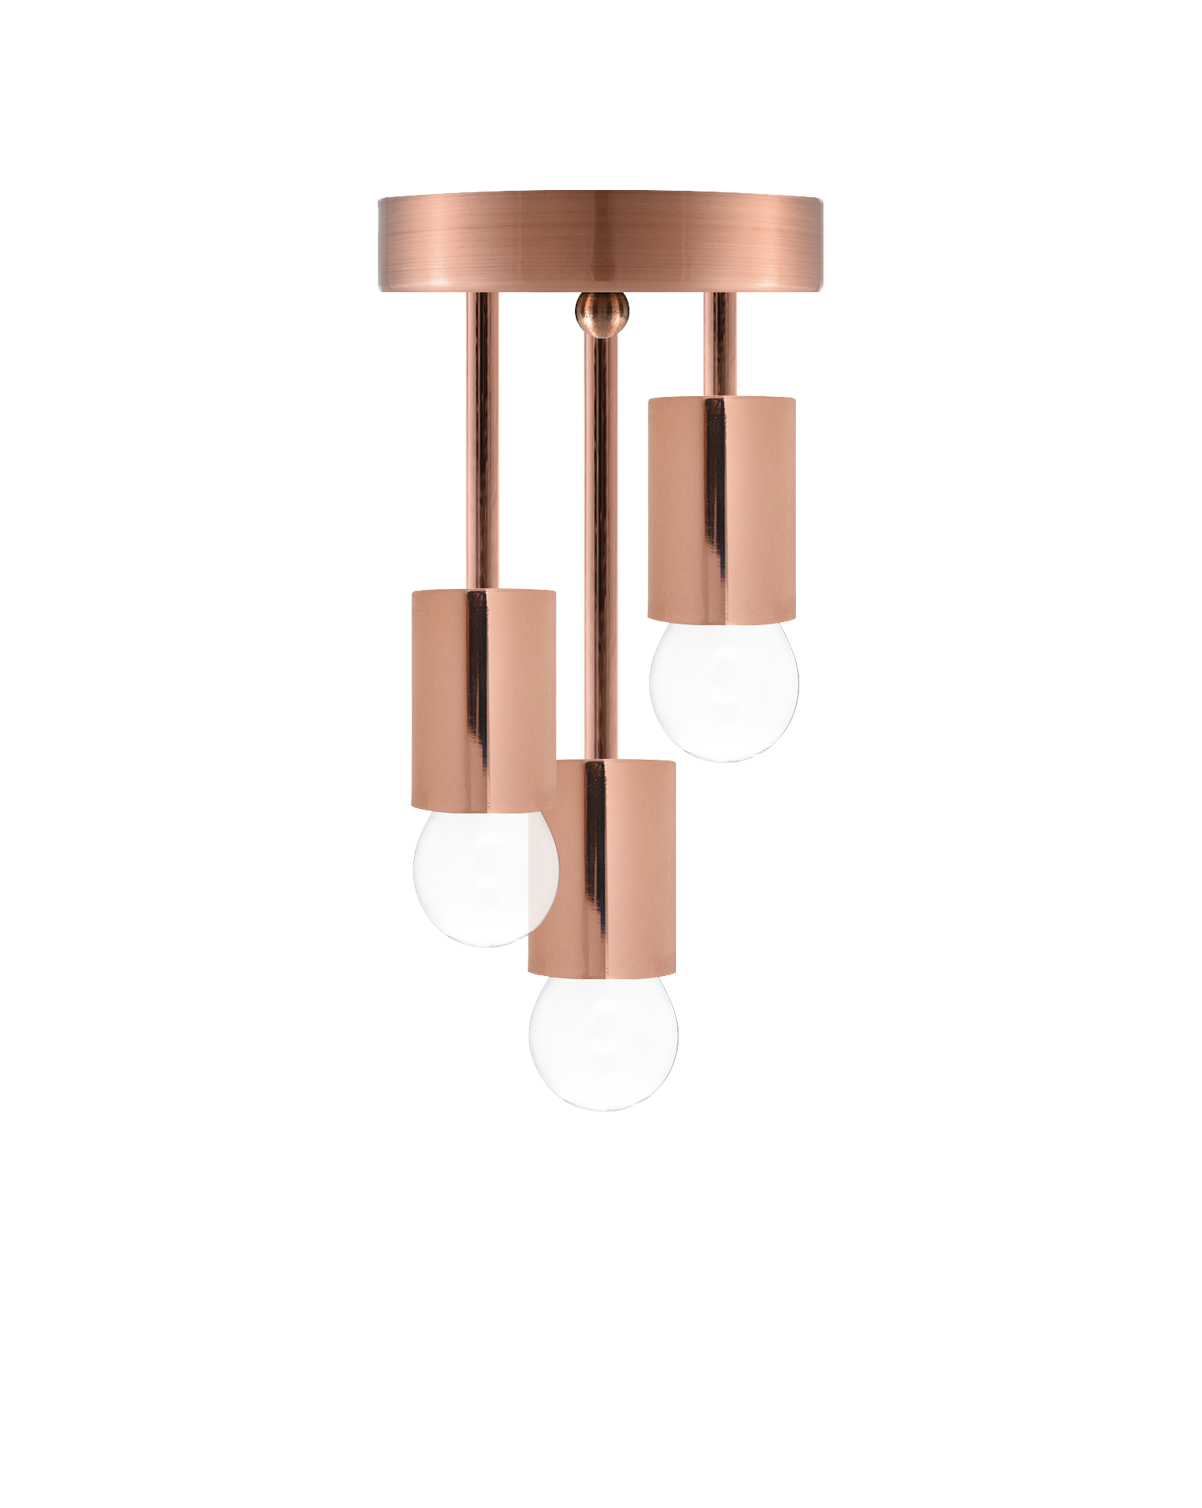 Semi-flush mount light fixture with a rose gold base and three hanging bulbs with matching rose gold cylindrical housings.